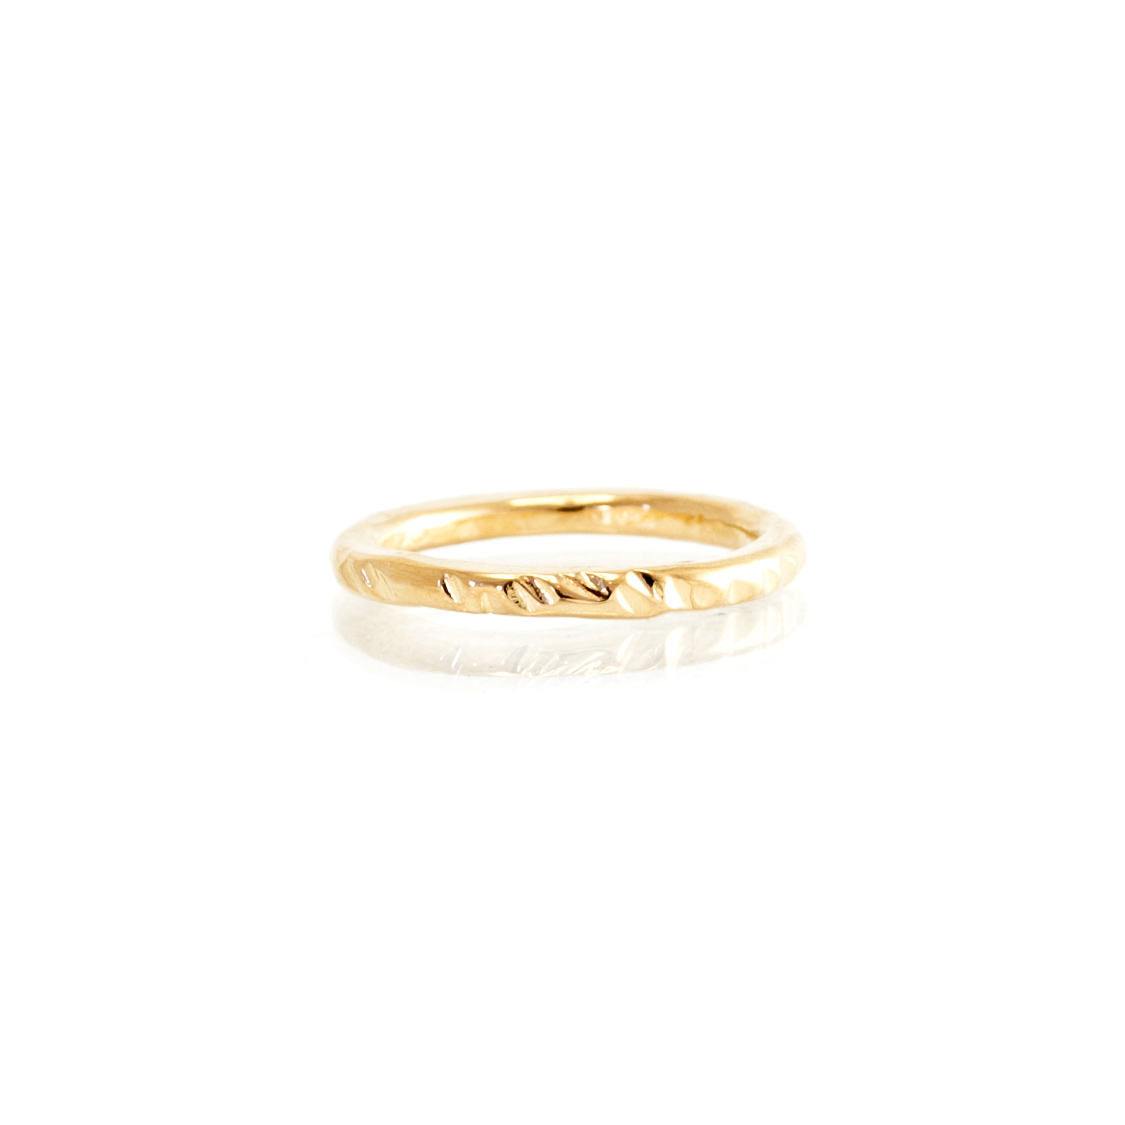 Gold Hammered Stacking Ring: Choose from Gold or Silver